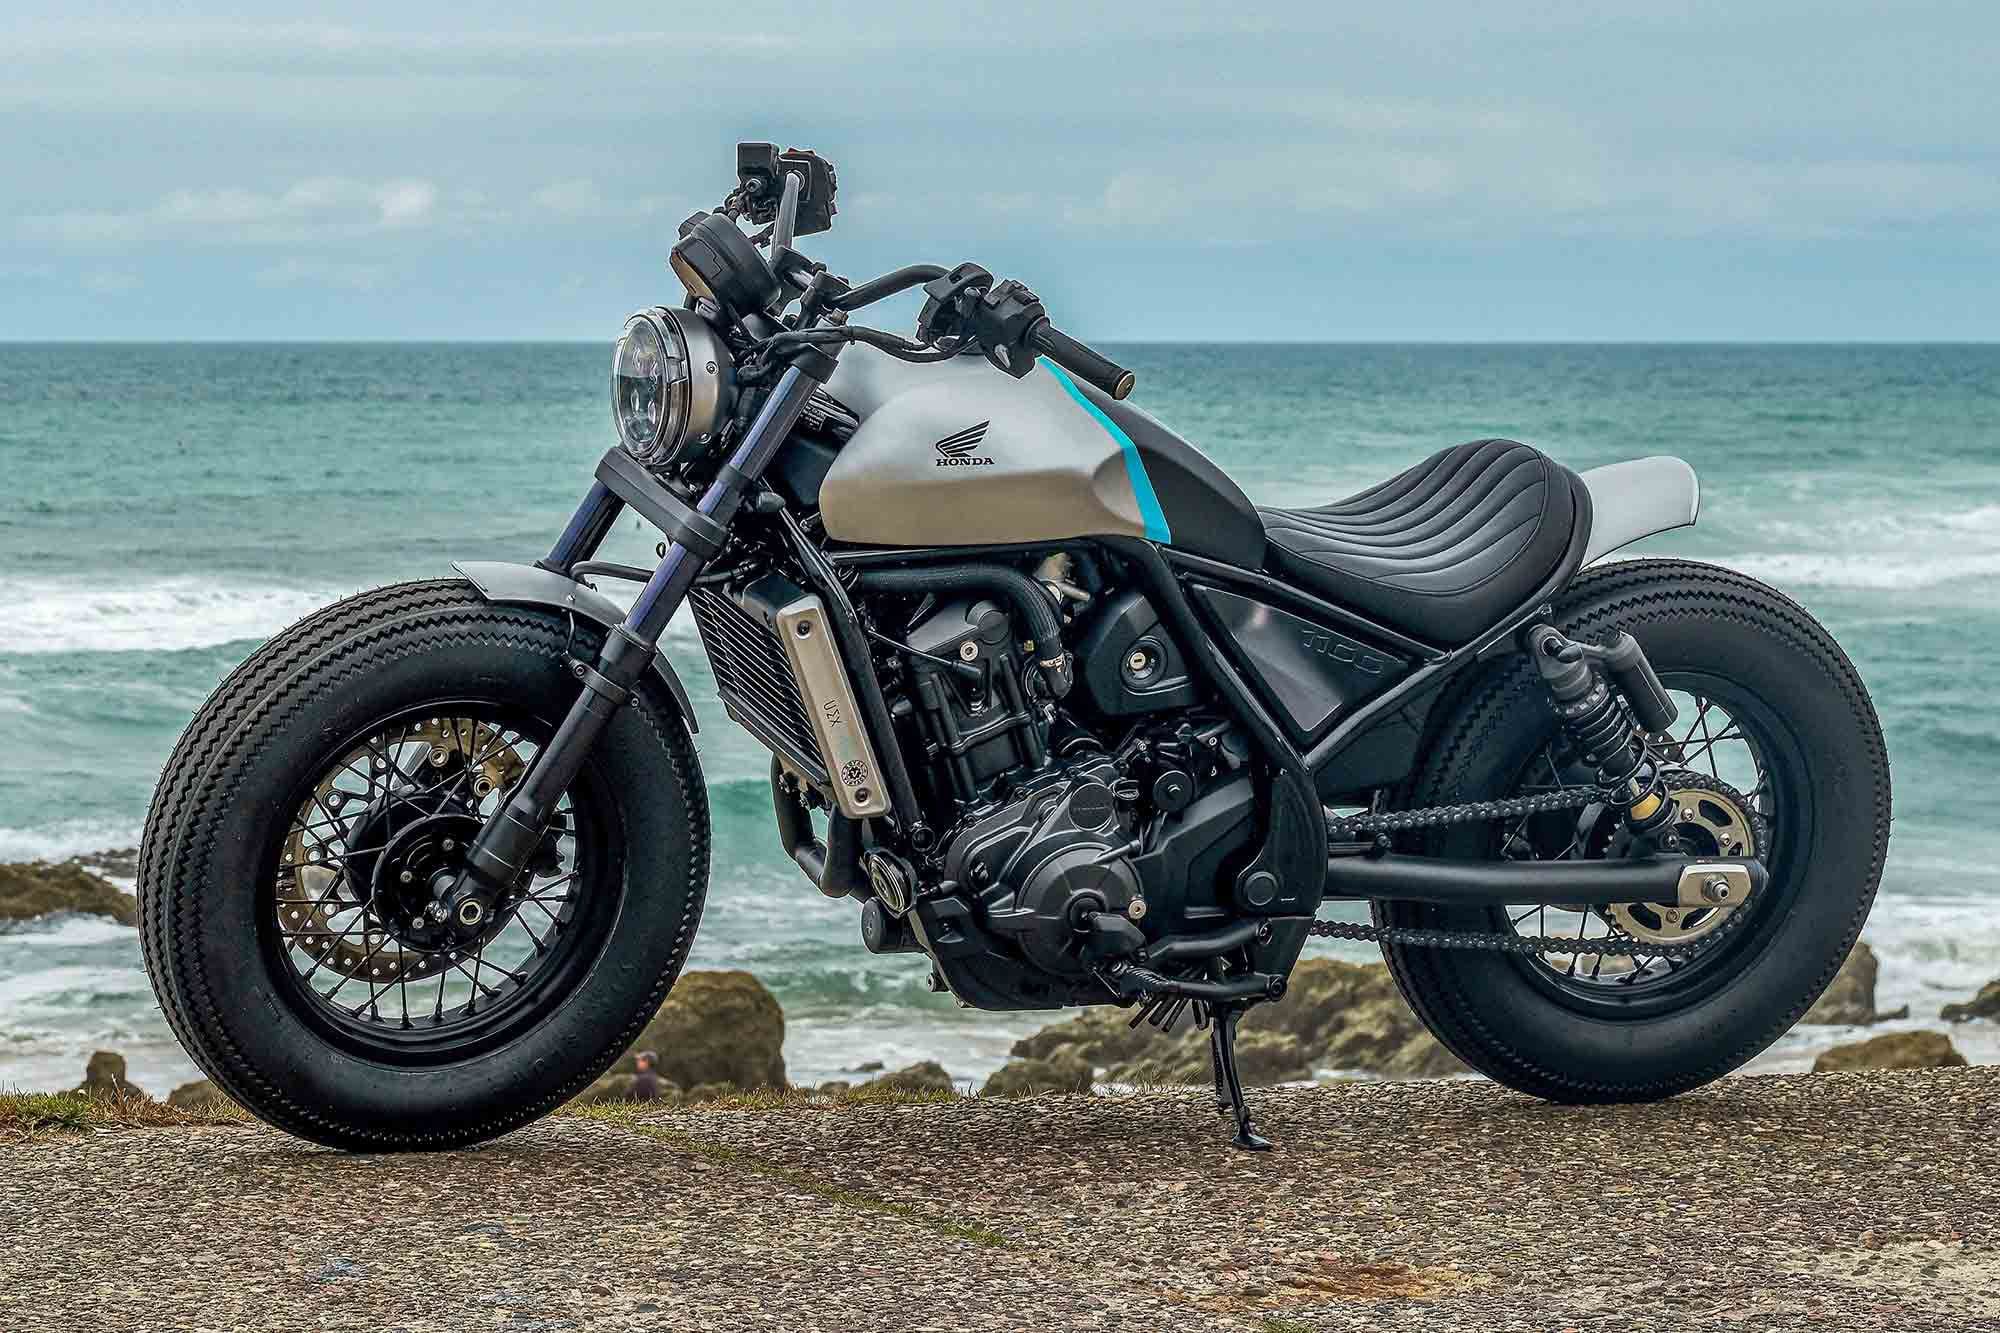 FCR delivered this bobber-styled interpretation as well, also based on the Rebel 1100. Fittingly, it’s called The Bobber.